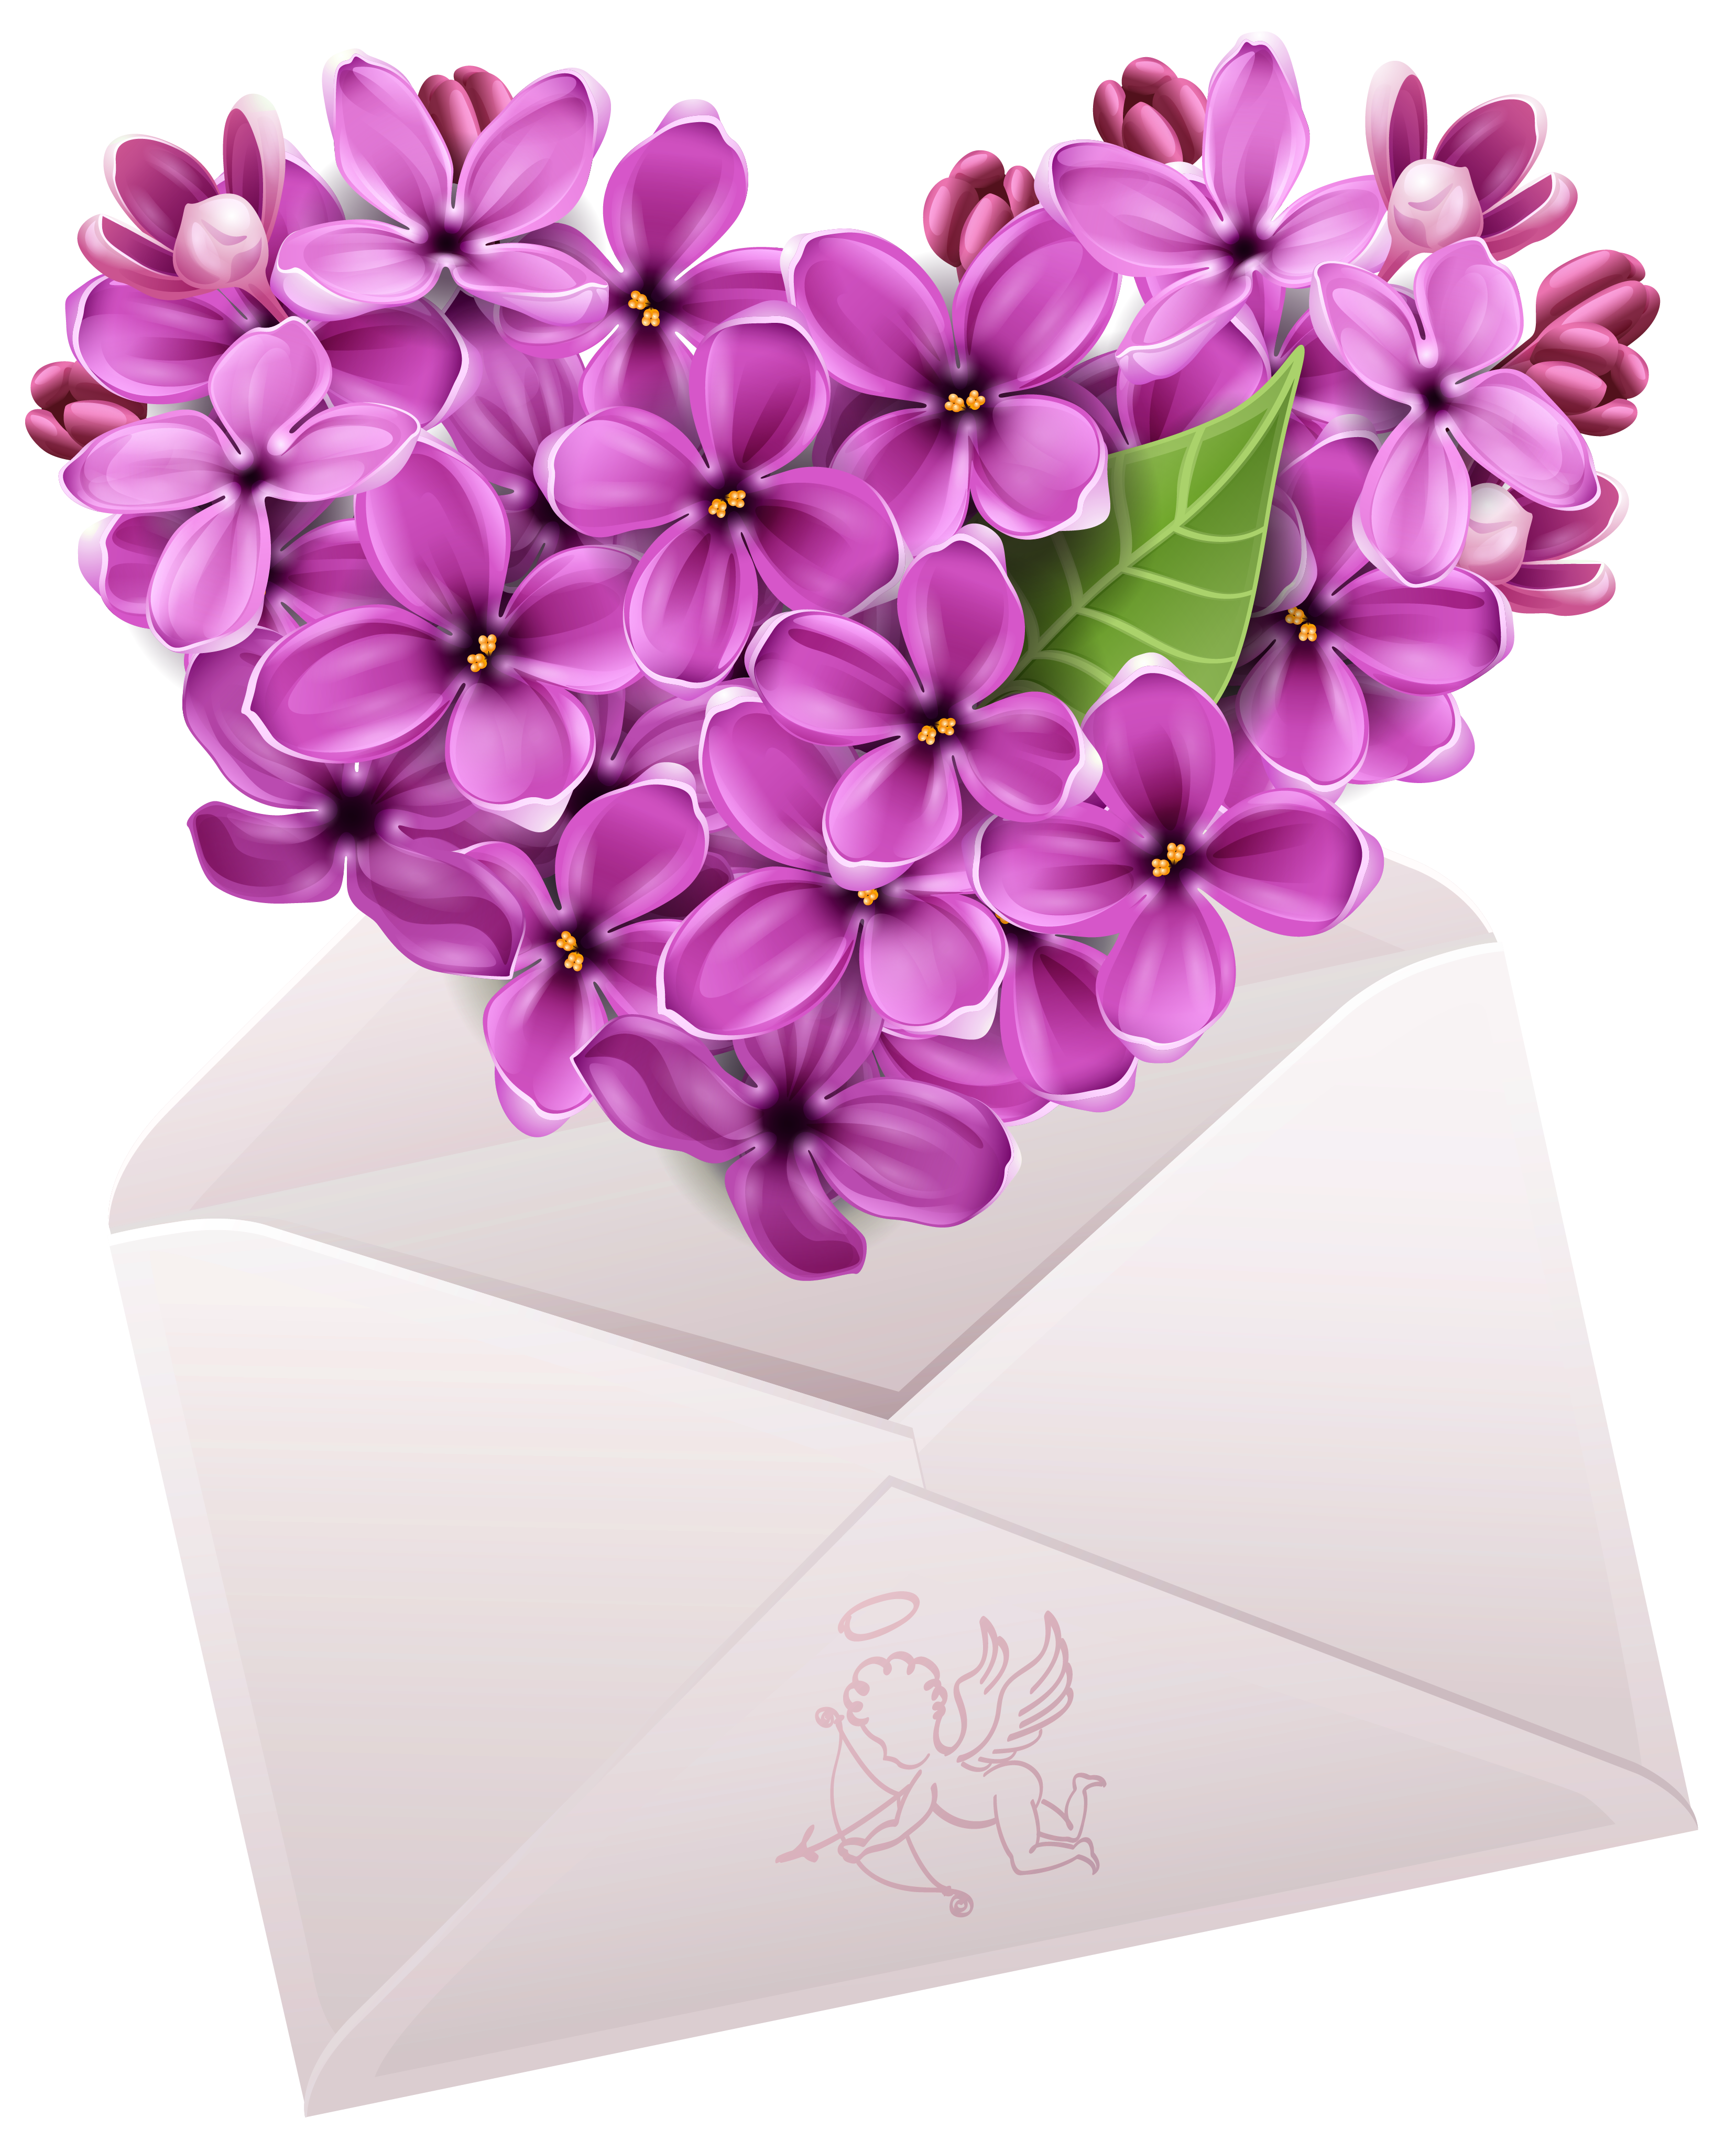 Emoticon Heart Flower Smiley Valentine Letter With PNG Image